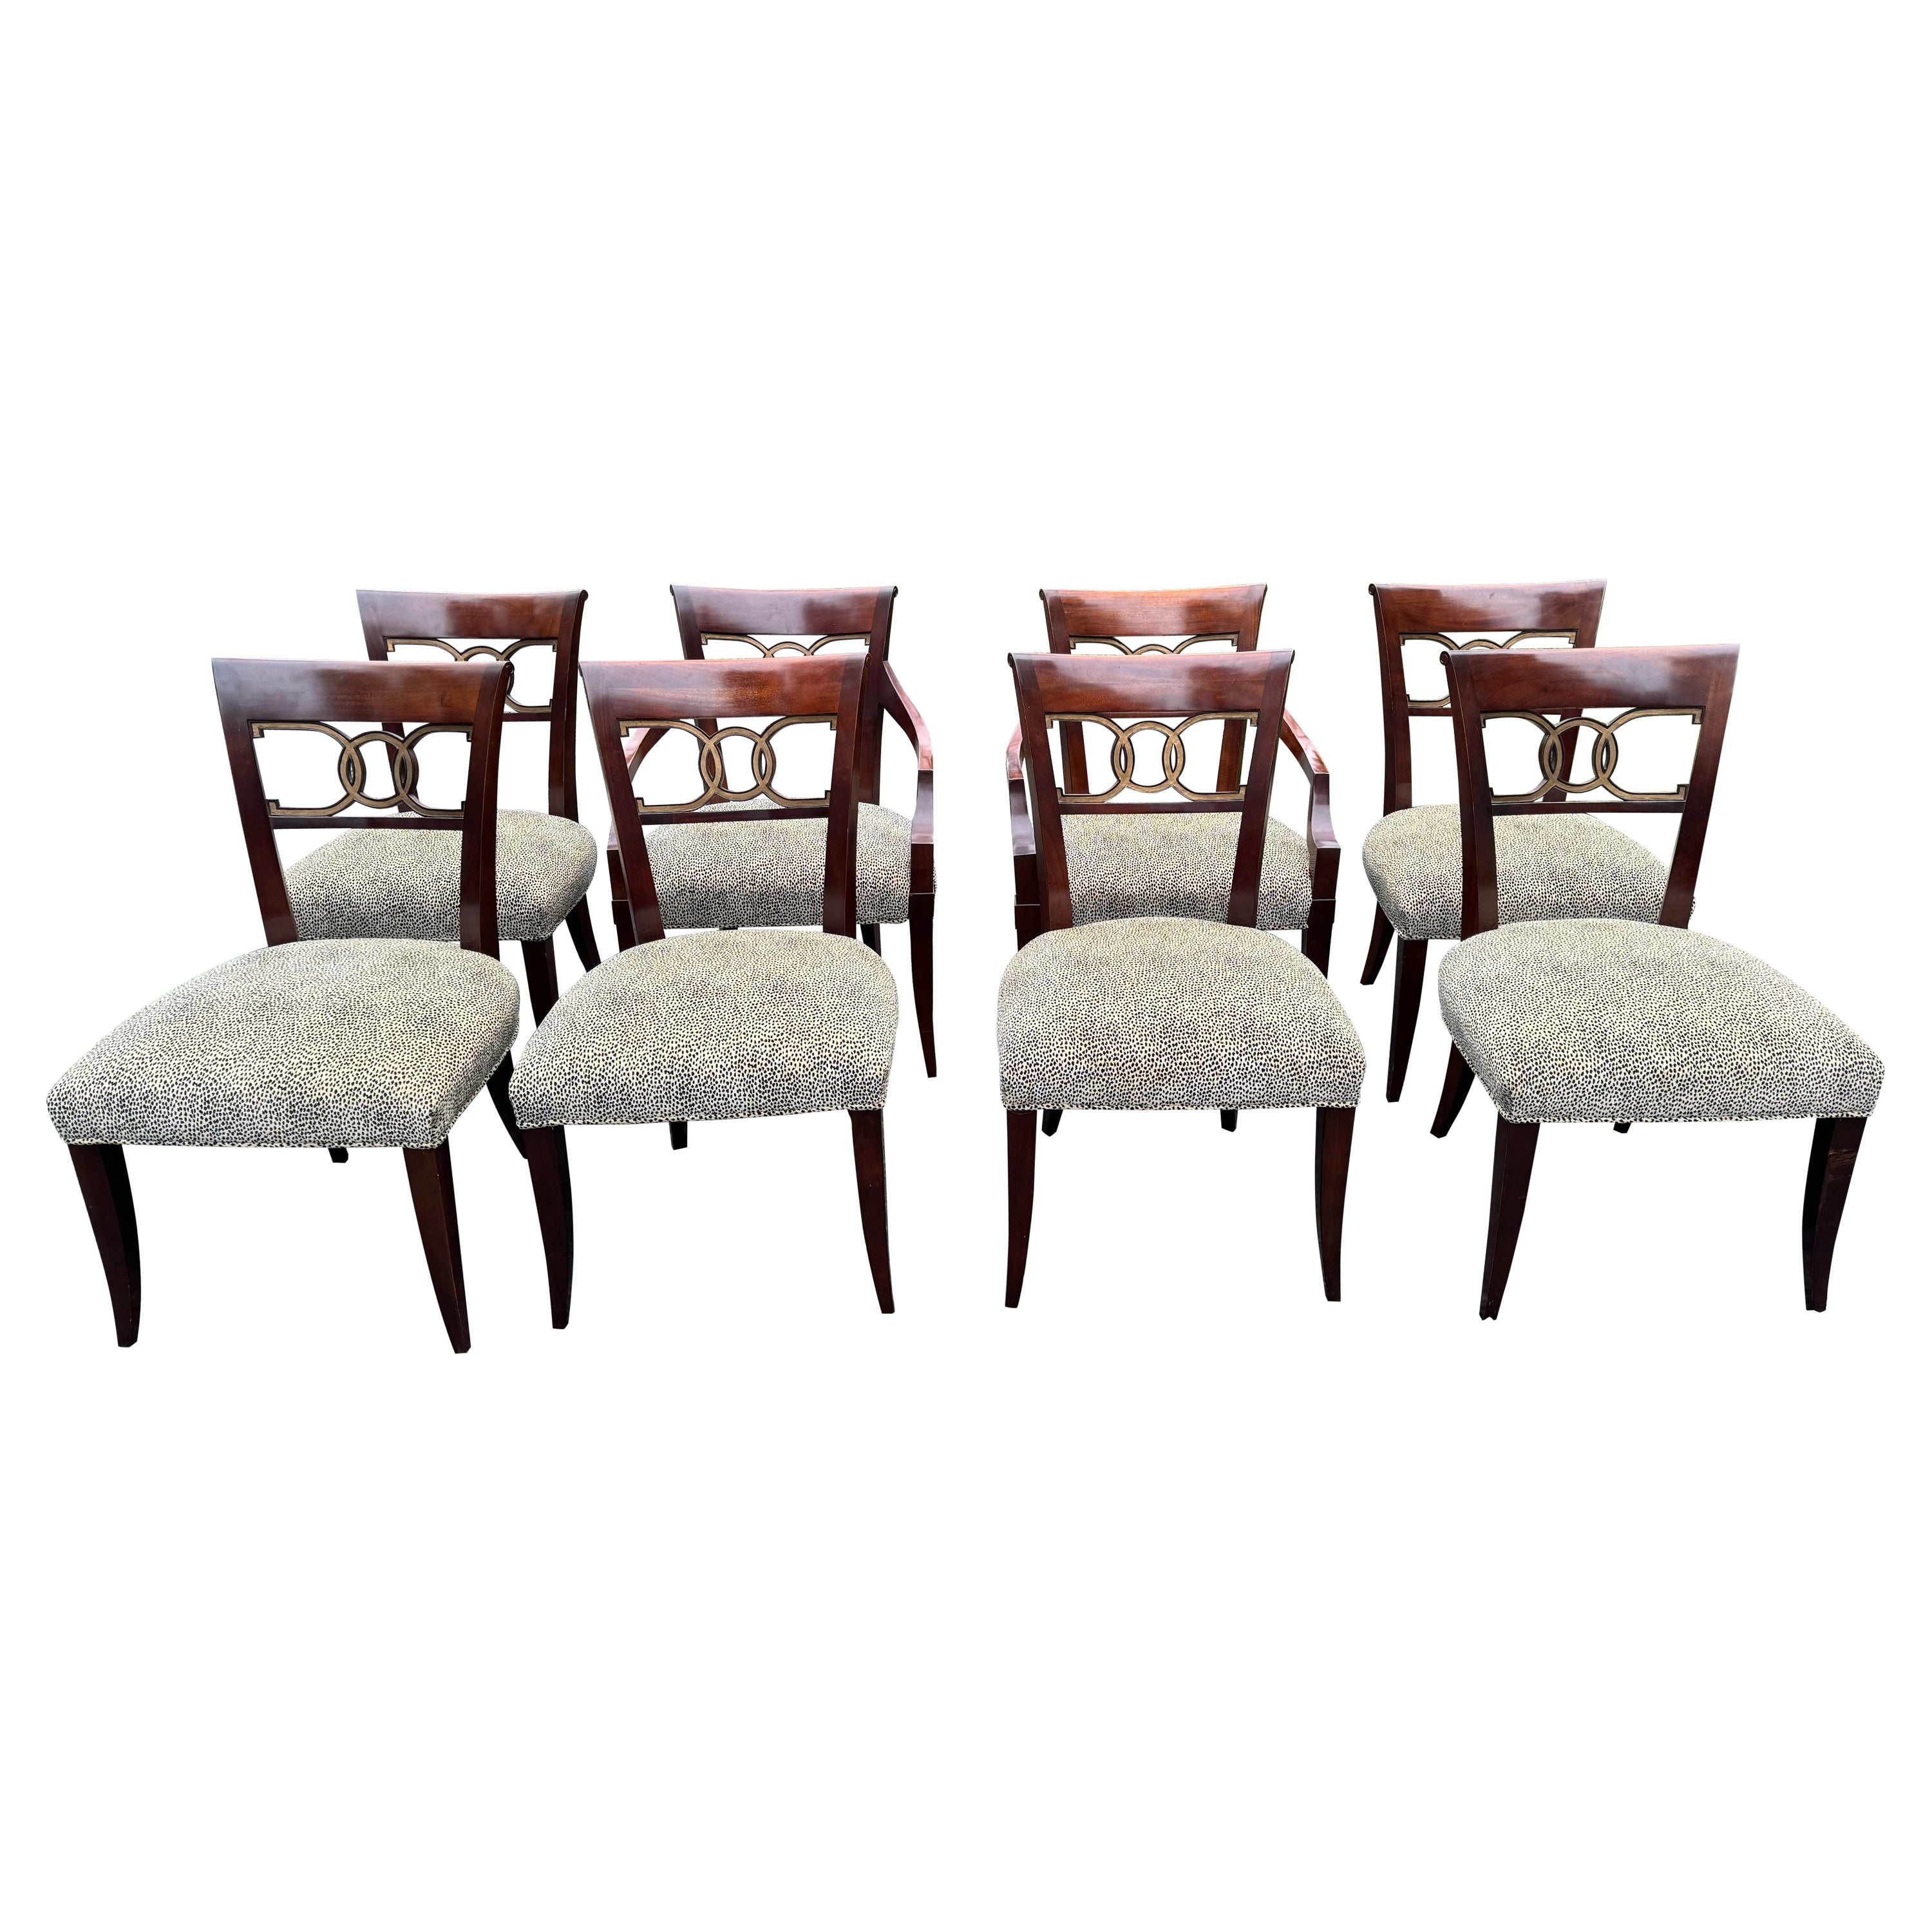 Elegant Set of 8 Biedermeier Style Dining Chairs by Baker For Sale